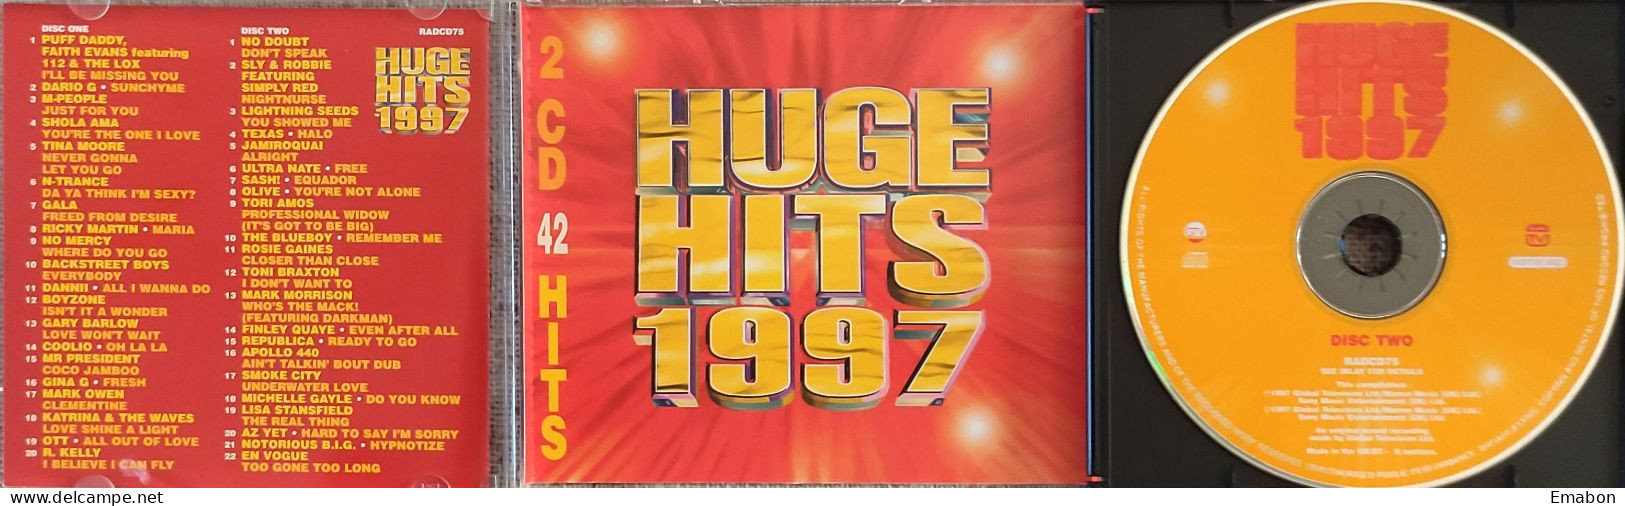 BORGATTA - HITS - 2 Cd  HUGE HITS 1997 - 42 OF THE BIGGEST HITS OF THE YEAR  - GLOBAL  1997 - USATO In Buono Stato - Collectors